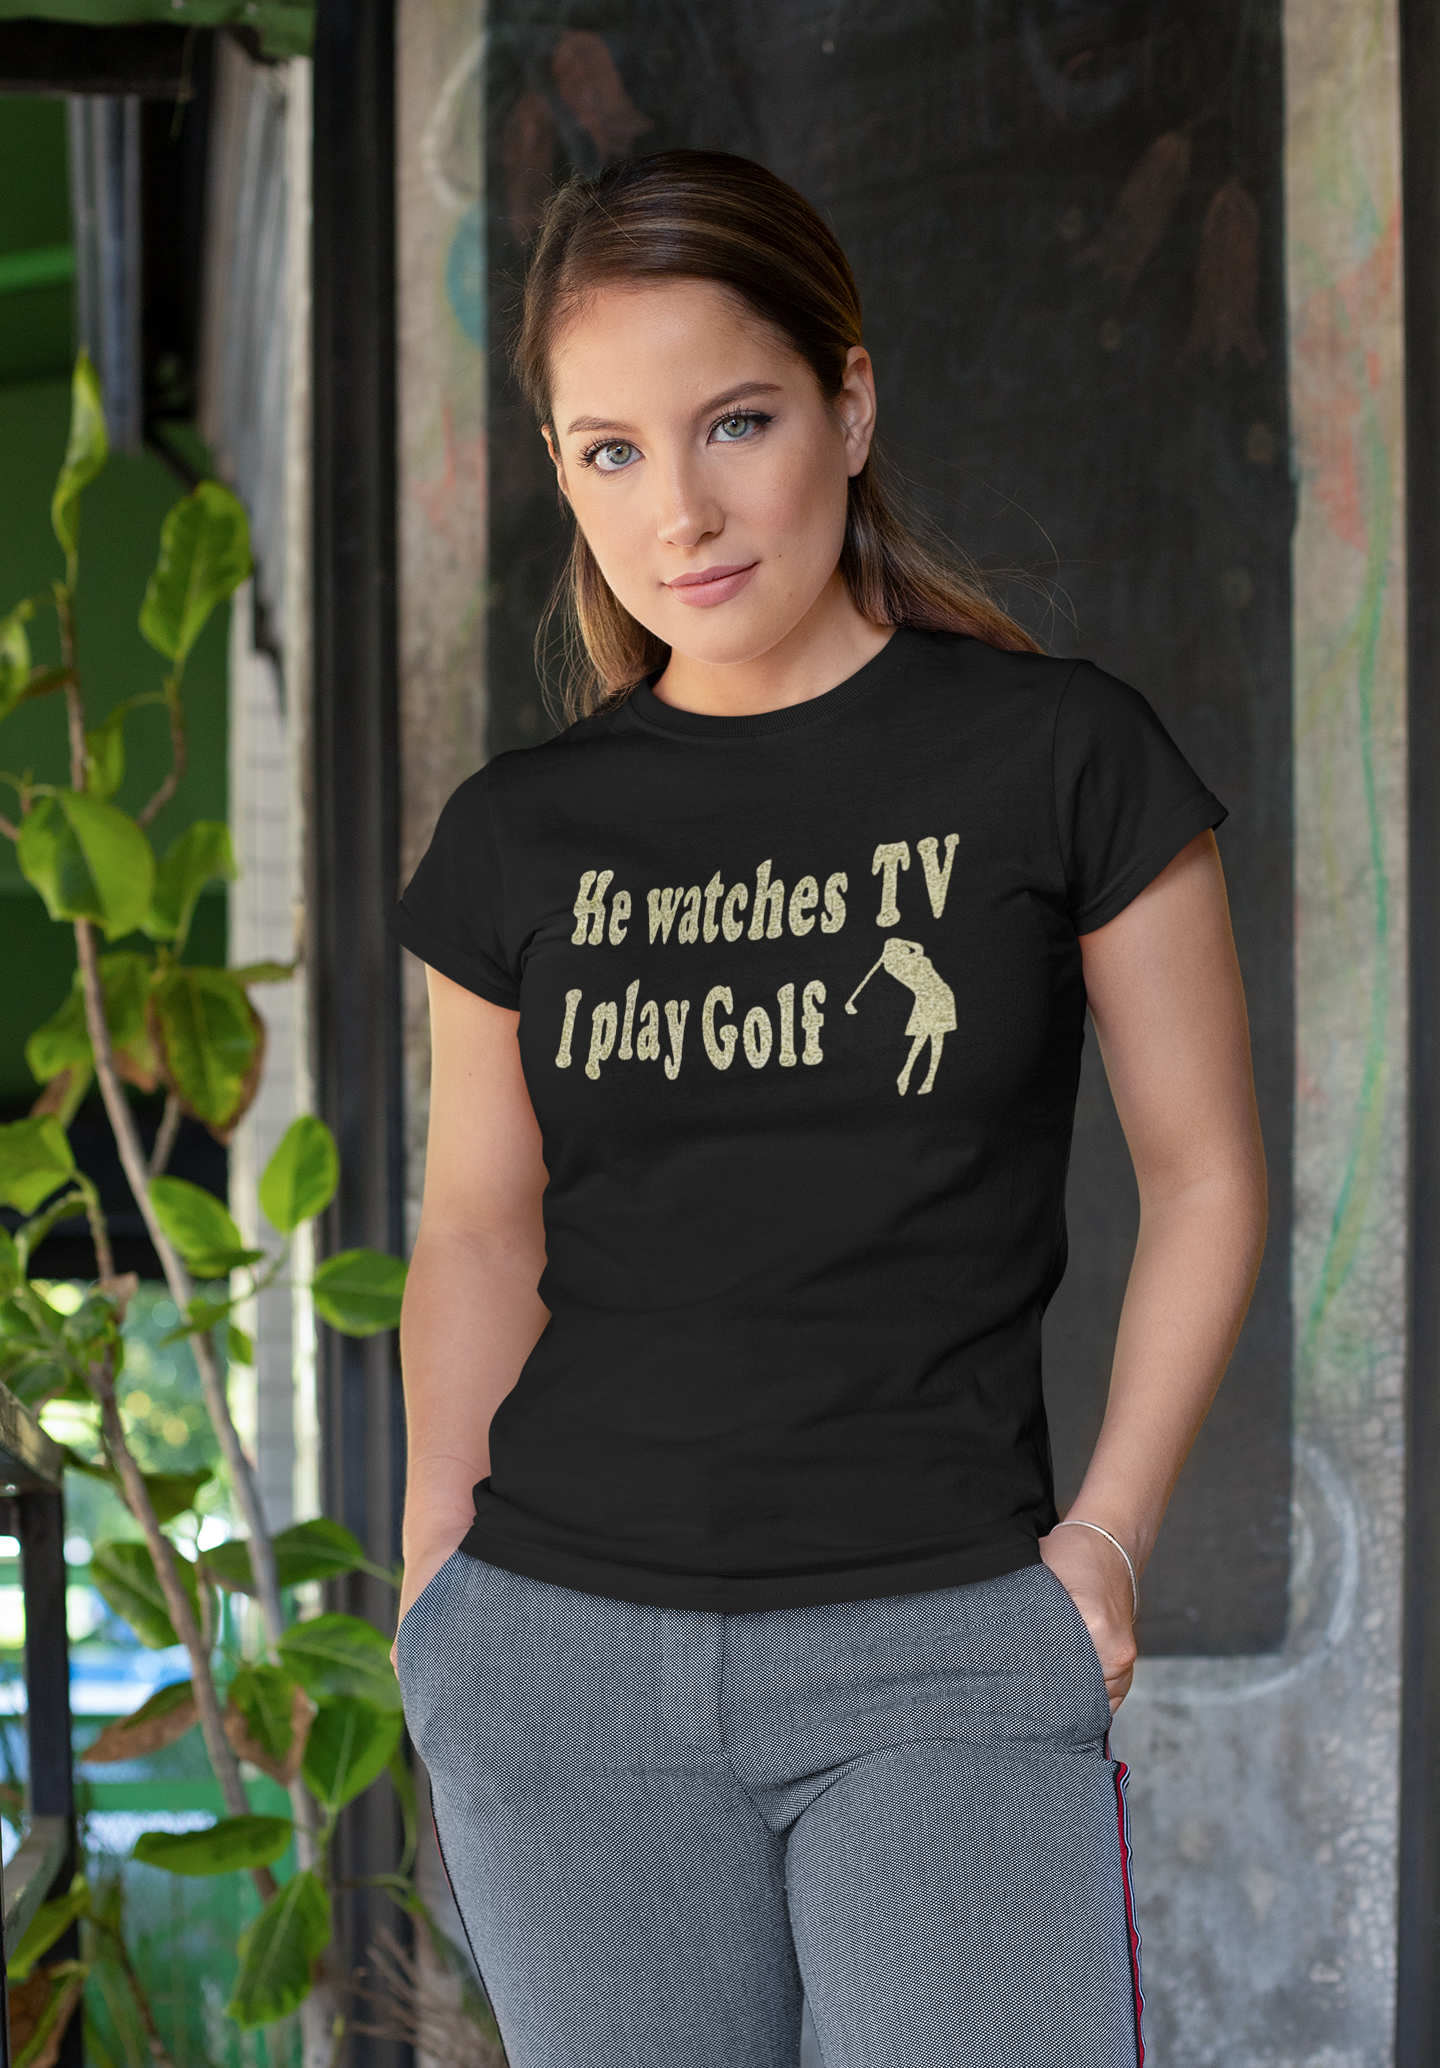 He Watches TV I Play Golf Women's T-Shirts (STYLE#1)